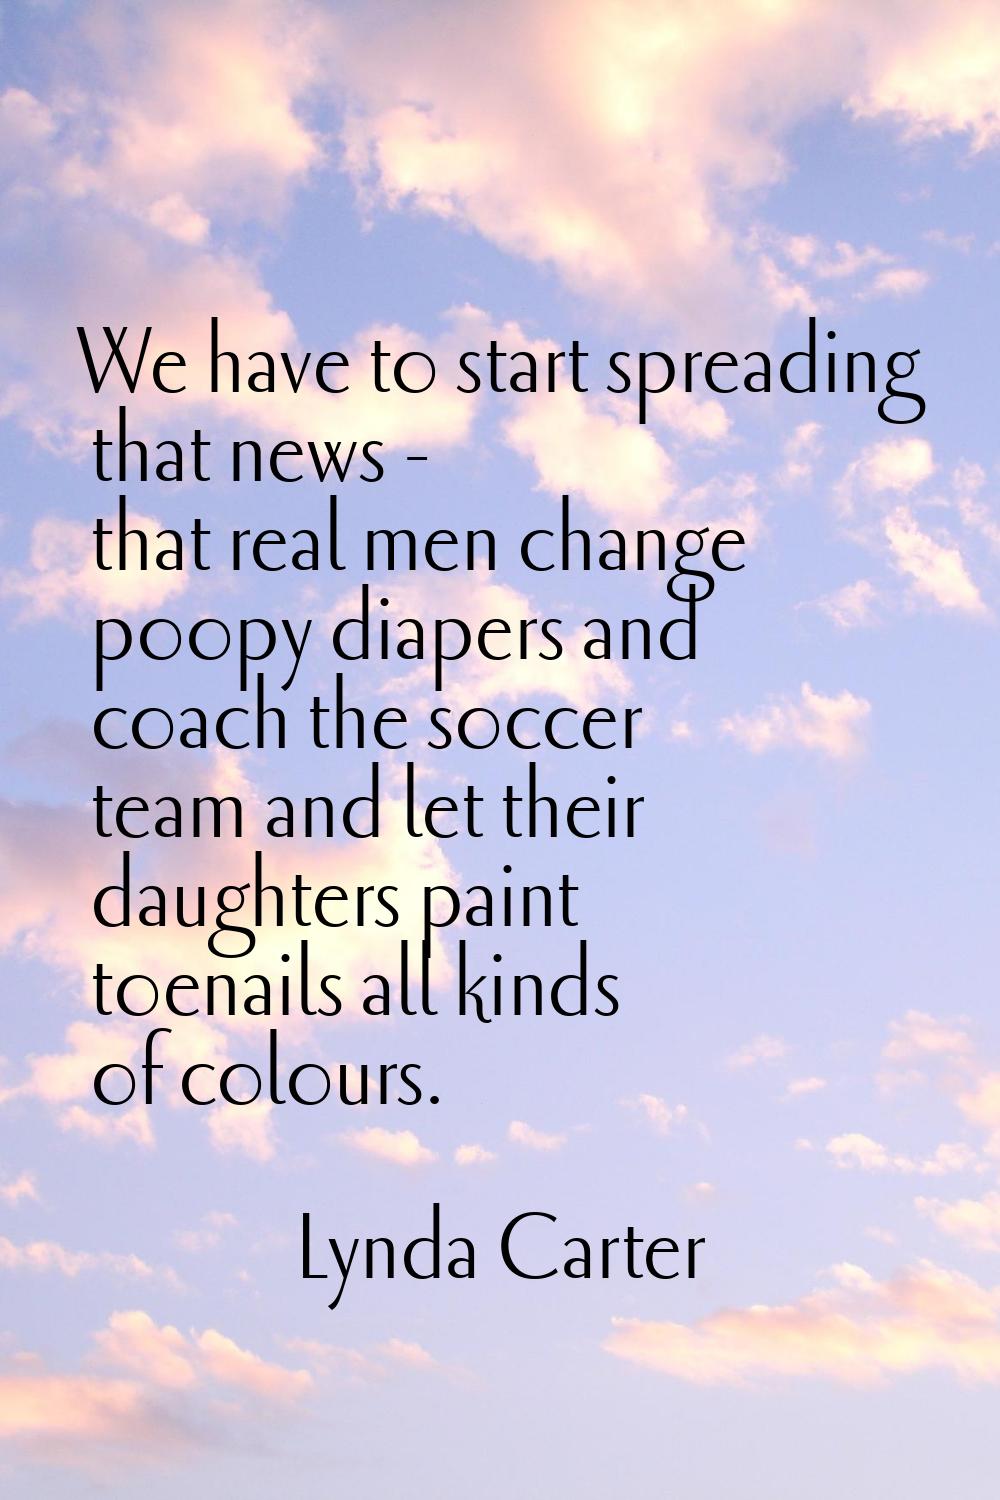 We have to start spreading that news - that real men change poopy diapers and coach the soccer team